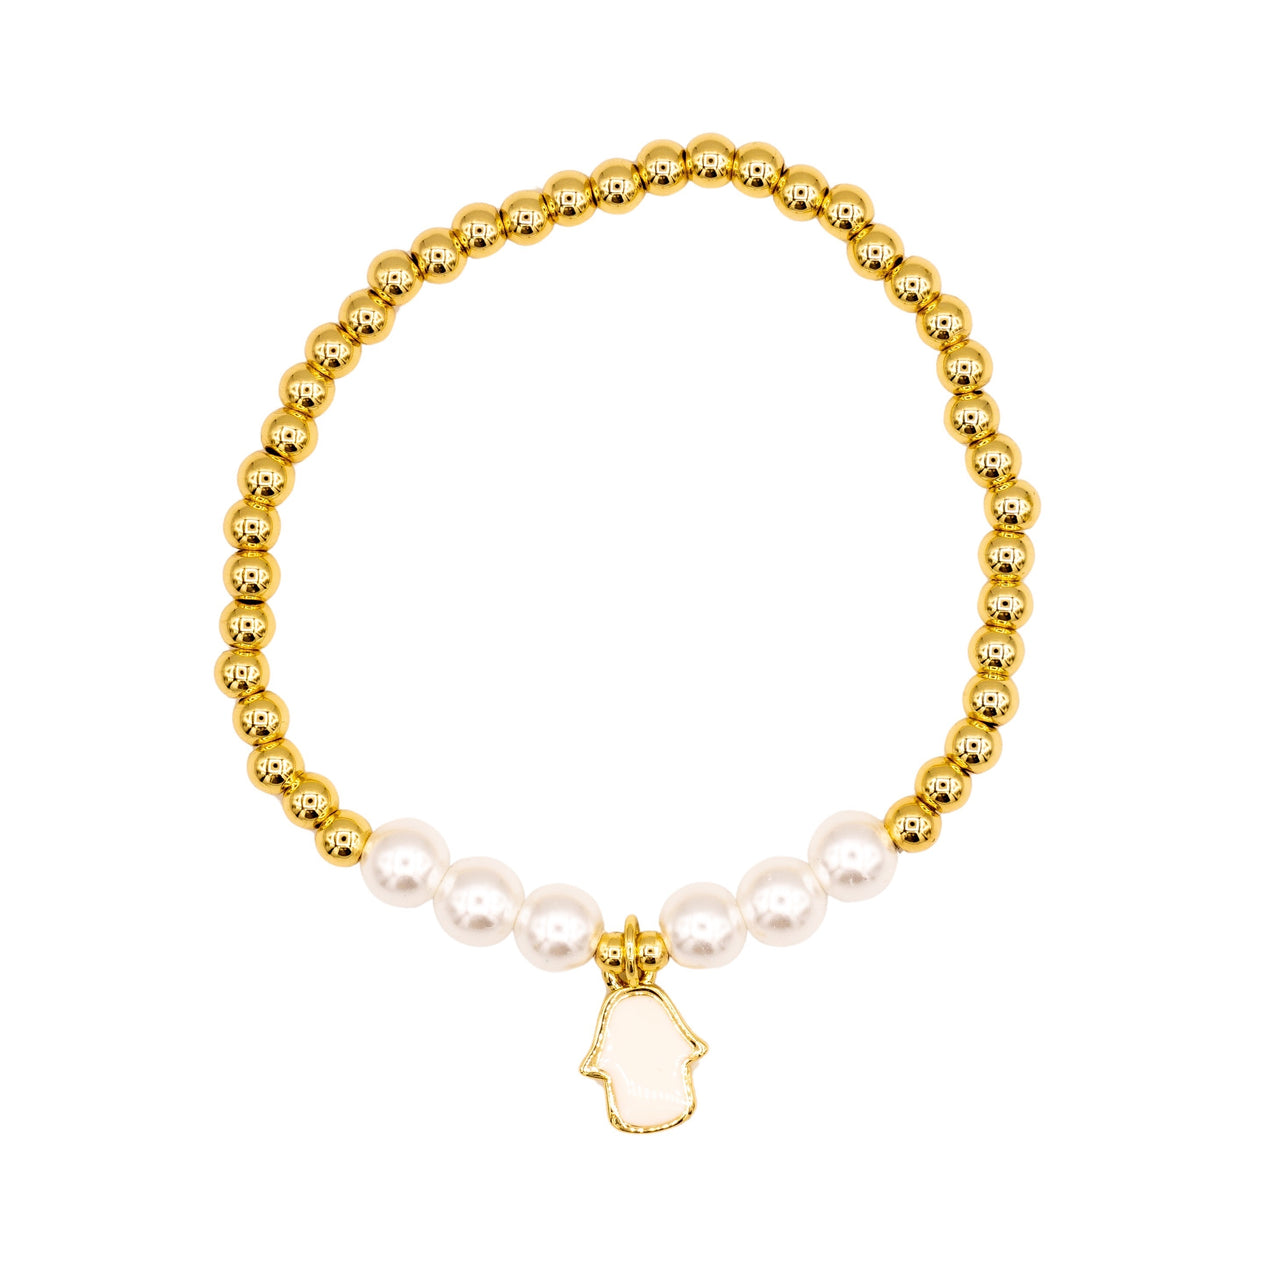 The 4mm Gold and Pearl Hamsa Beaded Bracelet